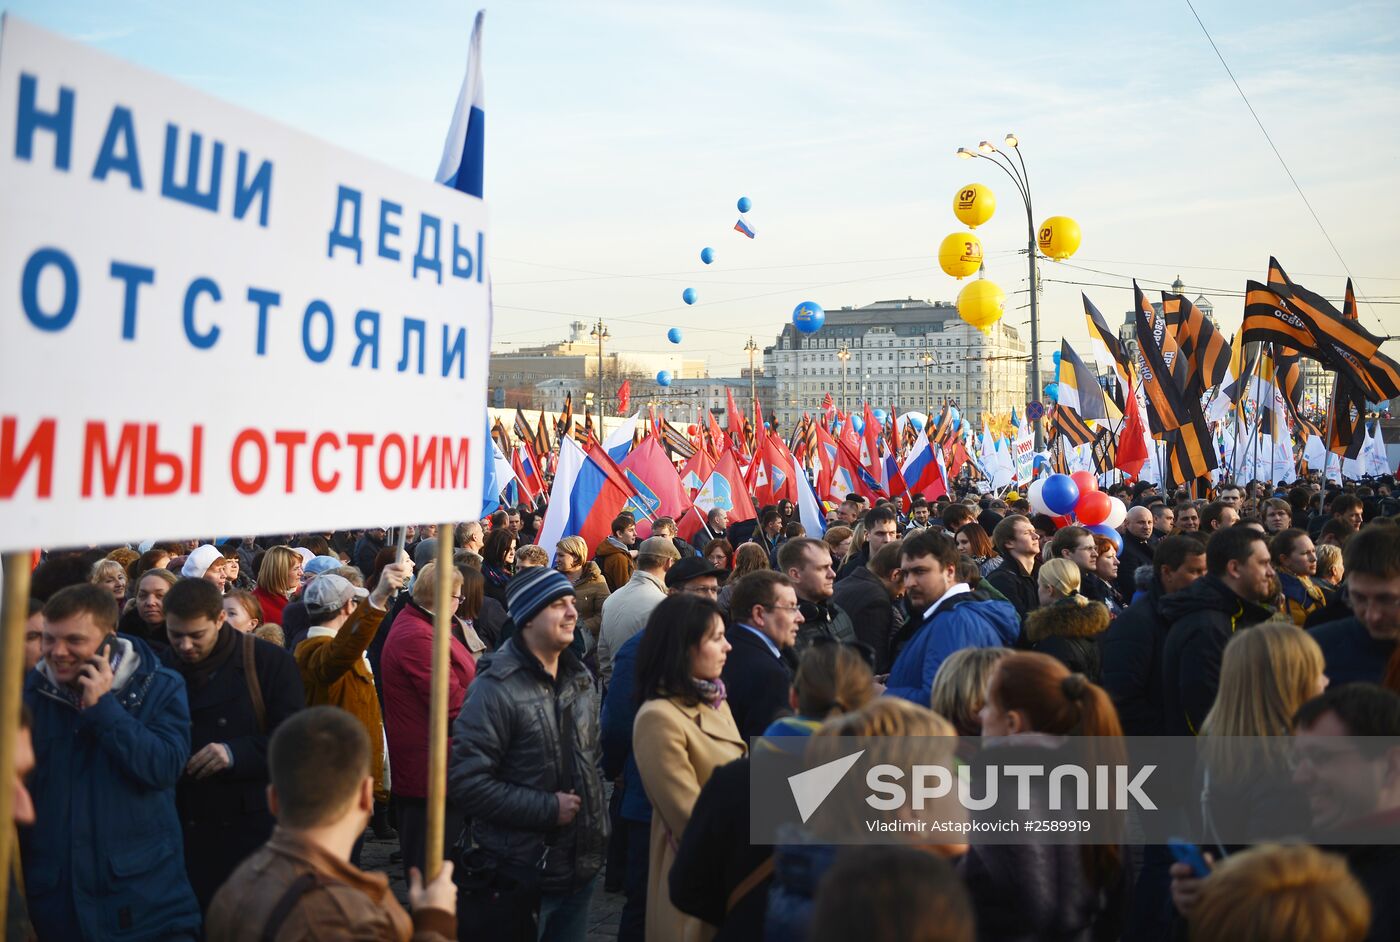 Rally and concert on Vasilyevsky Slope to mark anniversary of Crimea's reunification with Russia